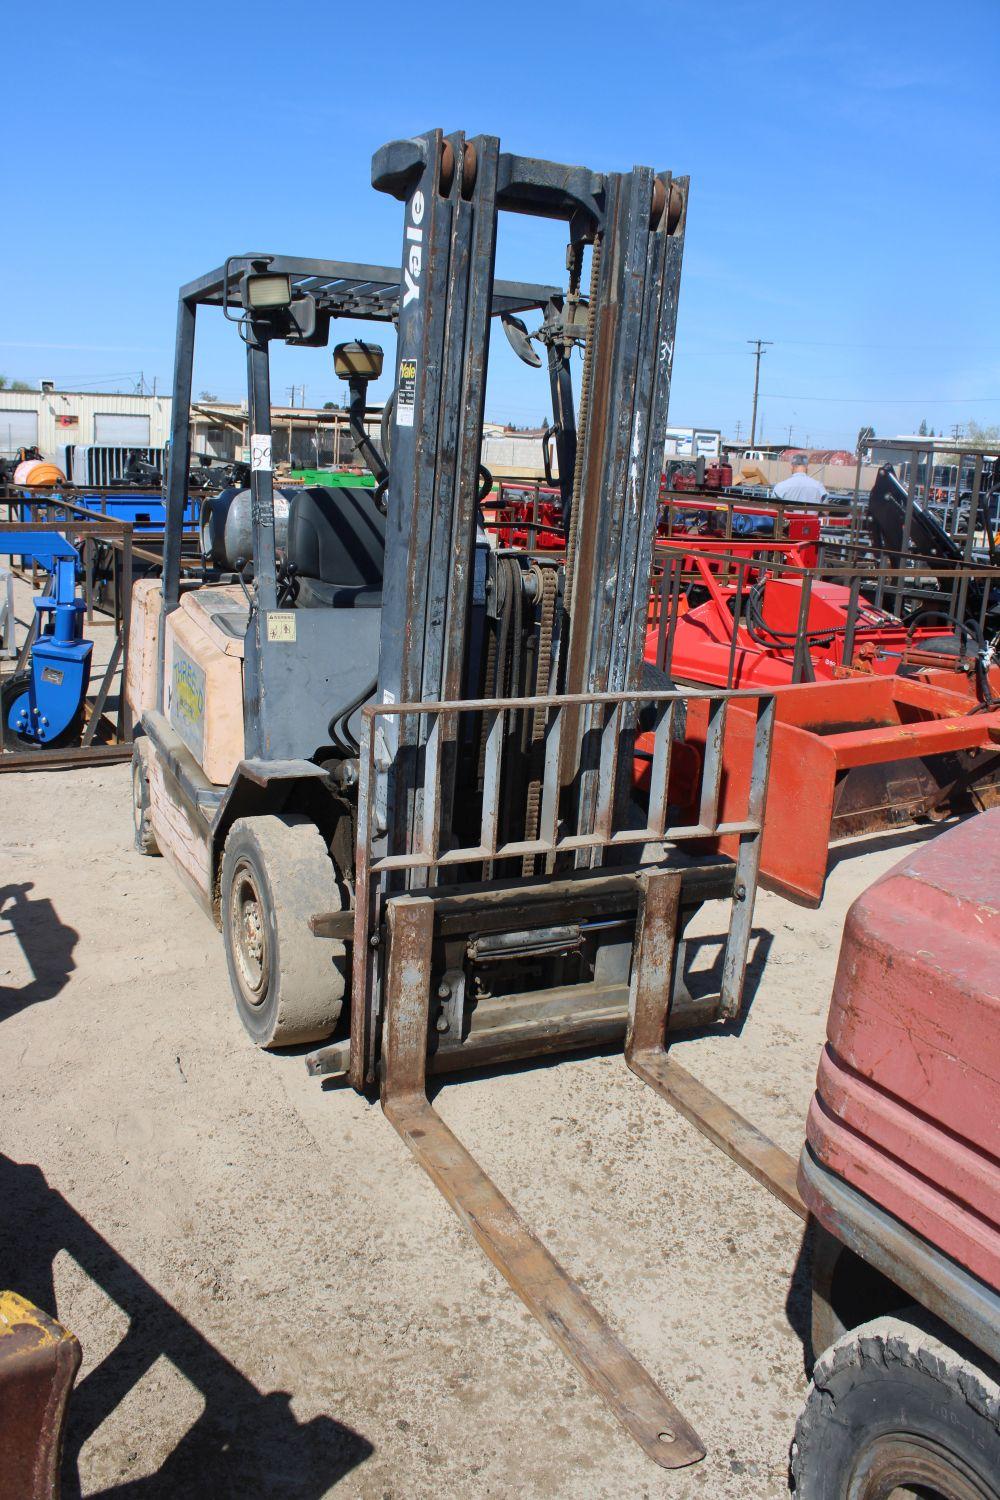 Yale Forklift 4300Ibs Cap